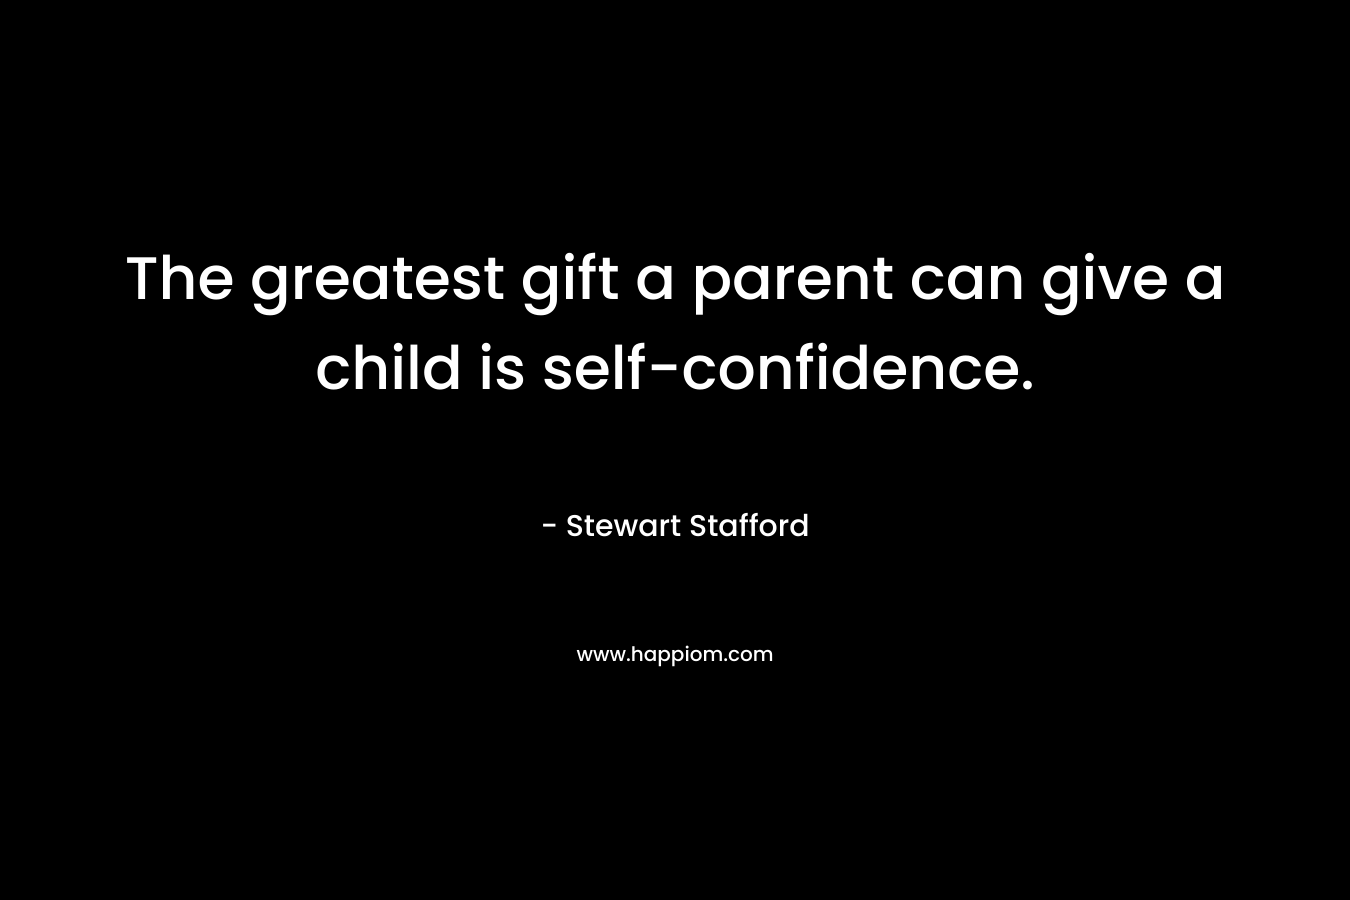 The greatest gift a parent can give a child is self-confidence.